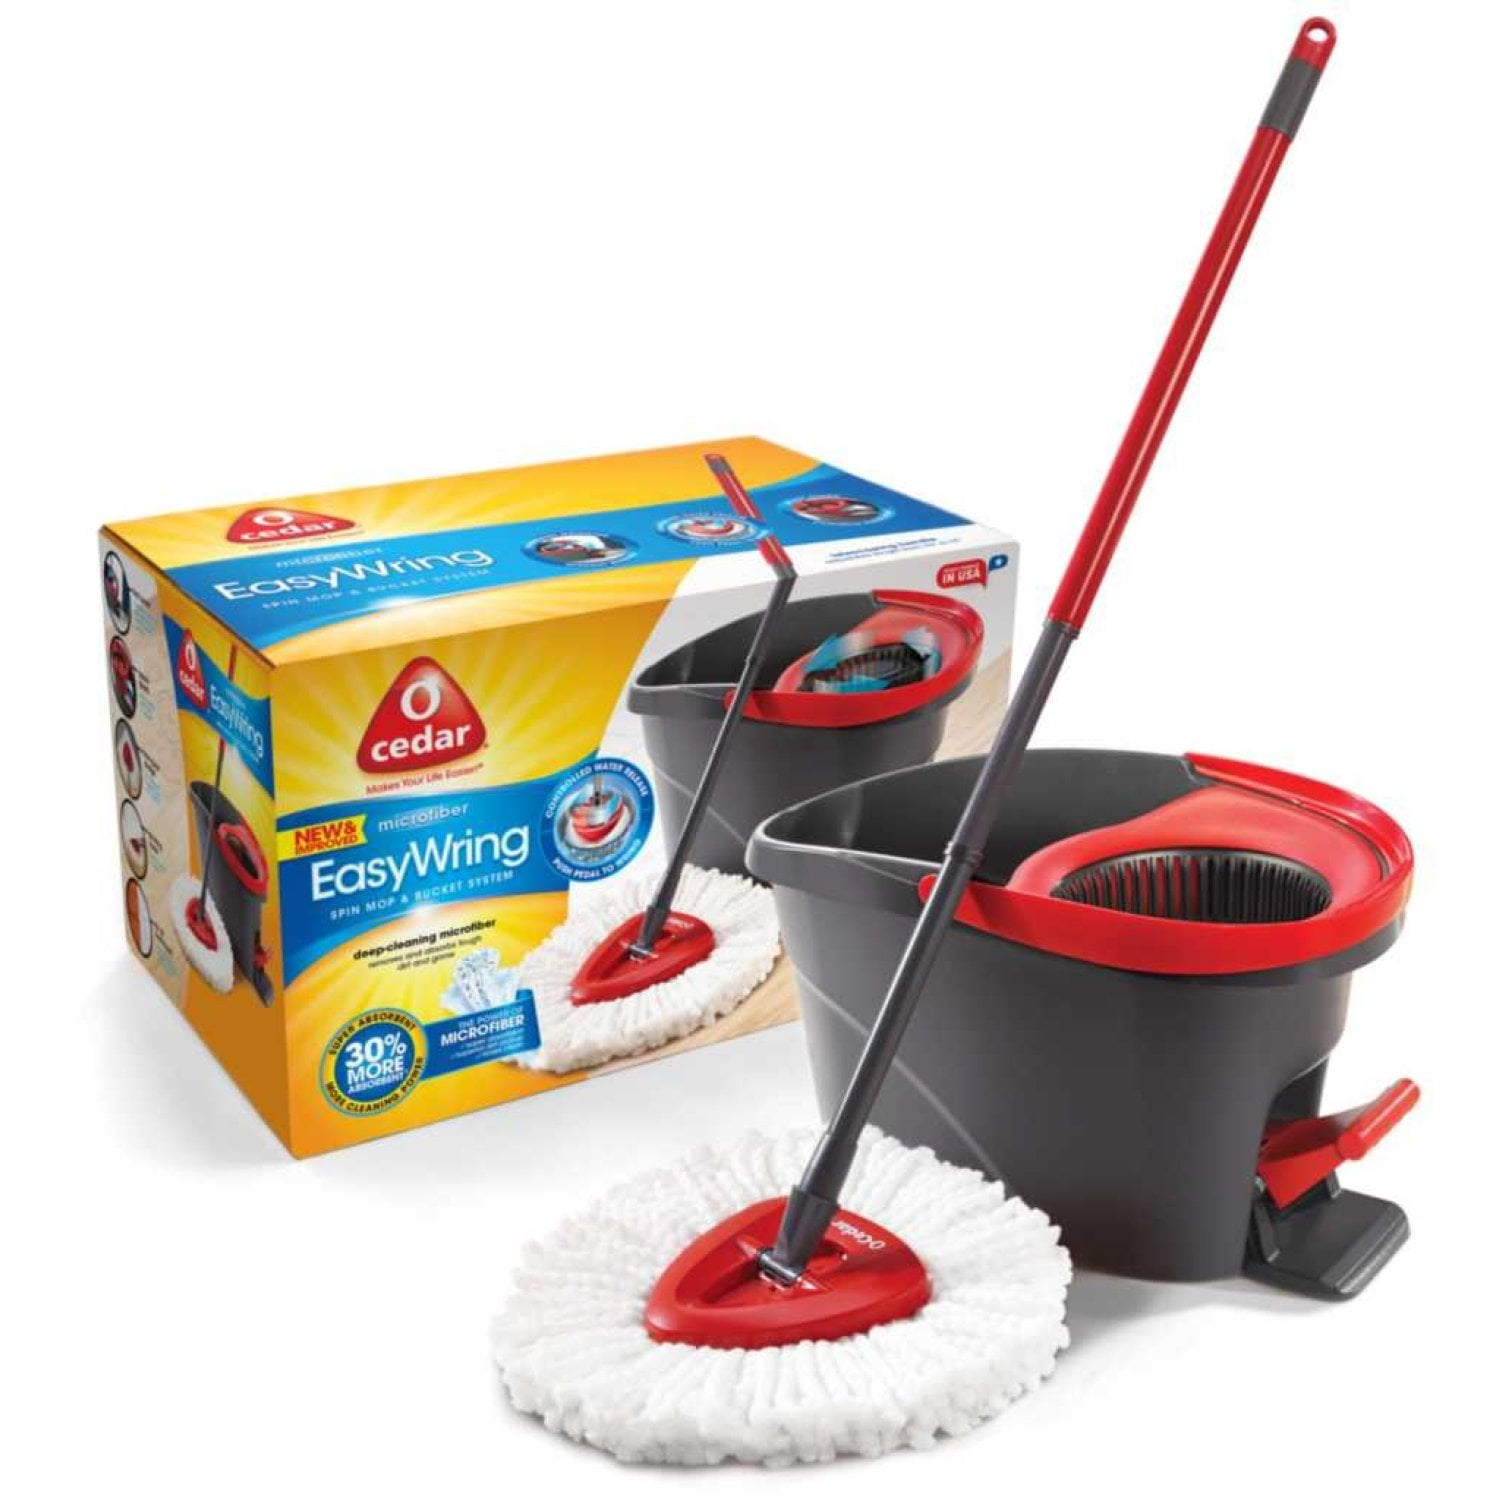 of Wring Mop - Wring Easy Mop Spin Bucket, - Bucket Spin Case 1 Easy 148473 Professional Vileda and - and